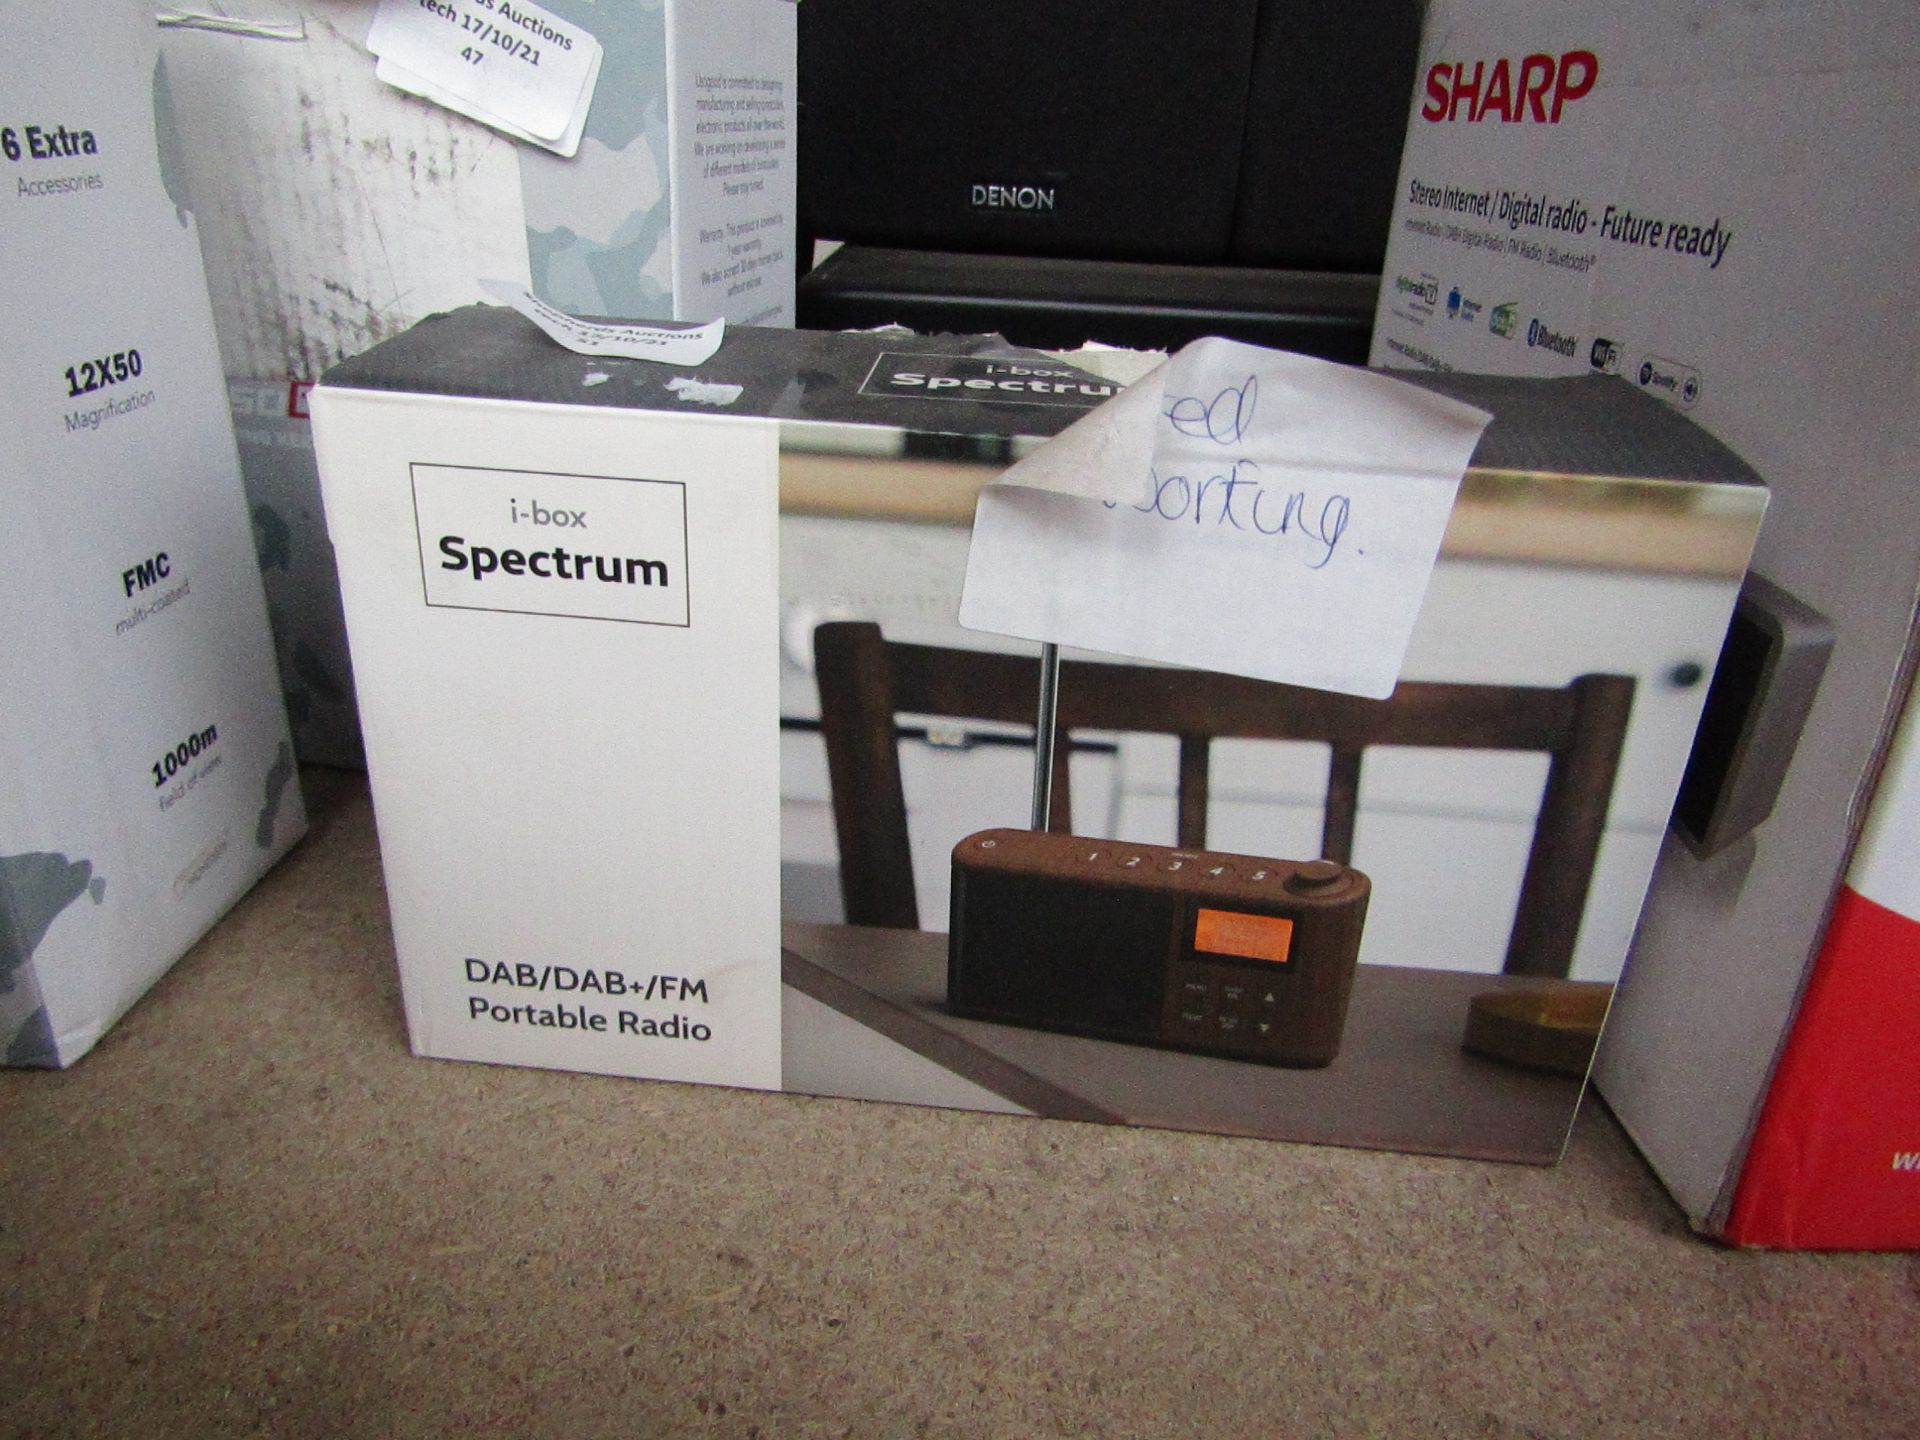 Ibox Spectrum DAB Radio - Tested Working & Boxed - RRP £33